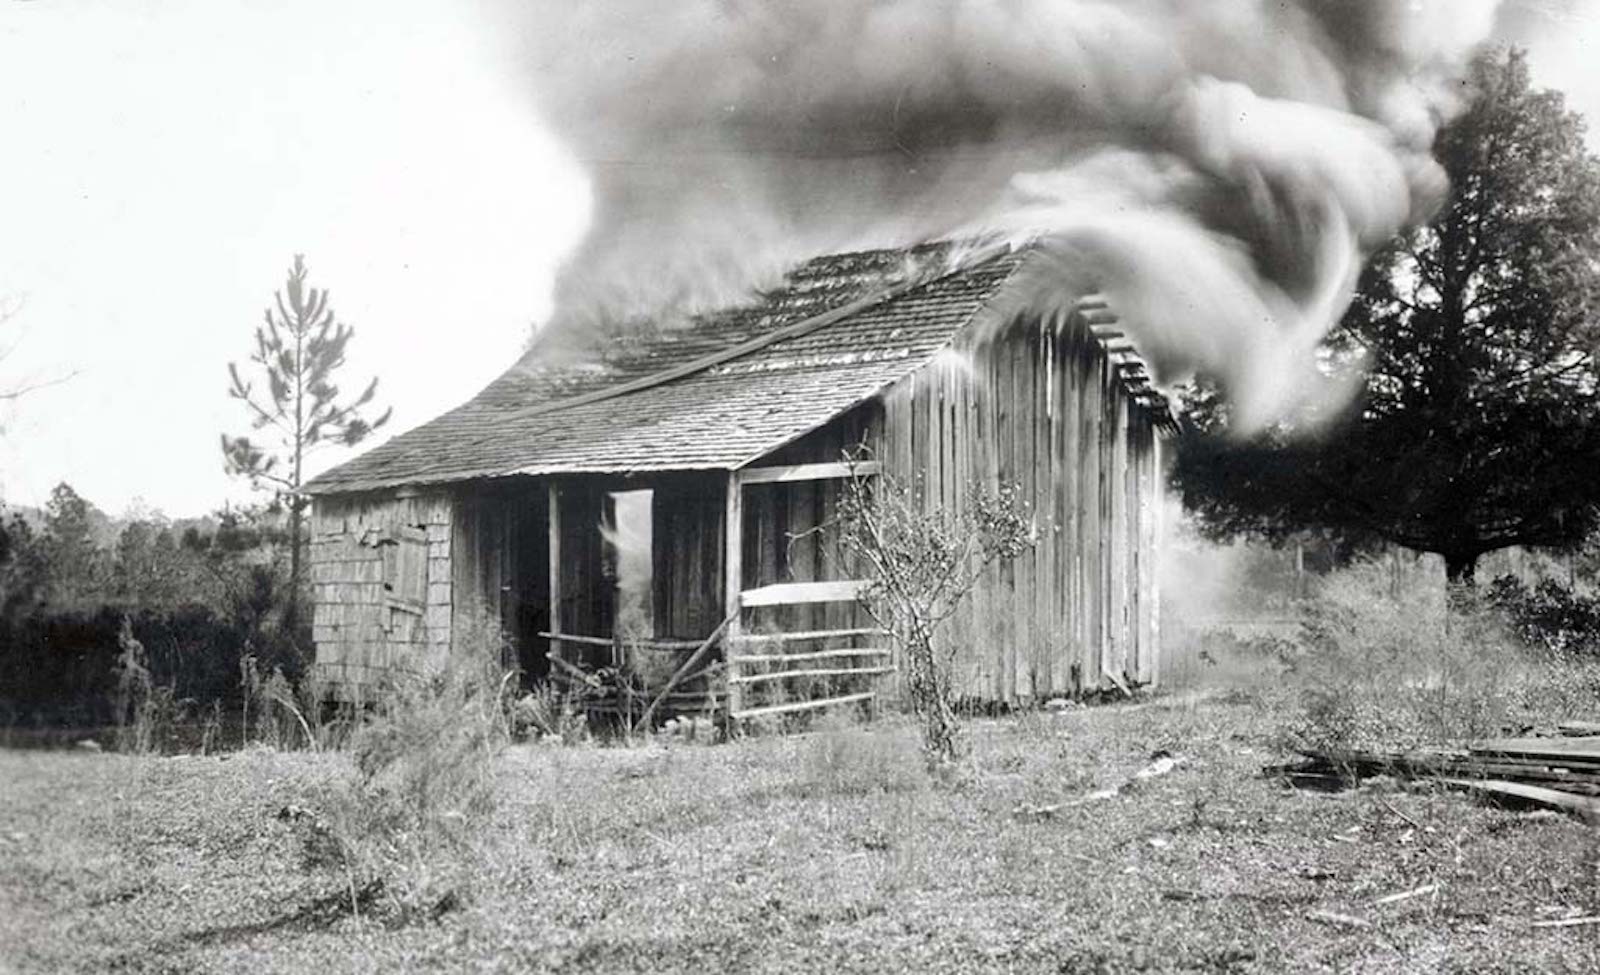 The Rosewood Massacre: How a lie destroyed a black town | The Atlanta Journal-Constitution